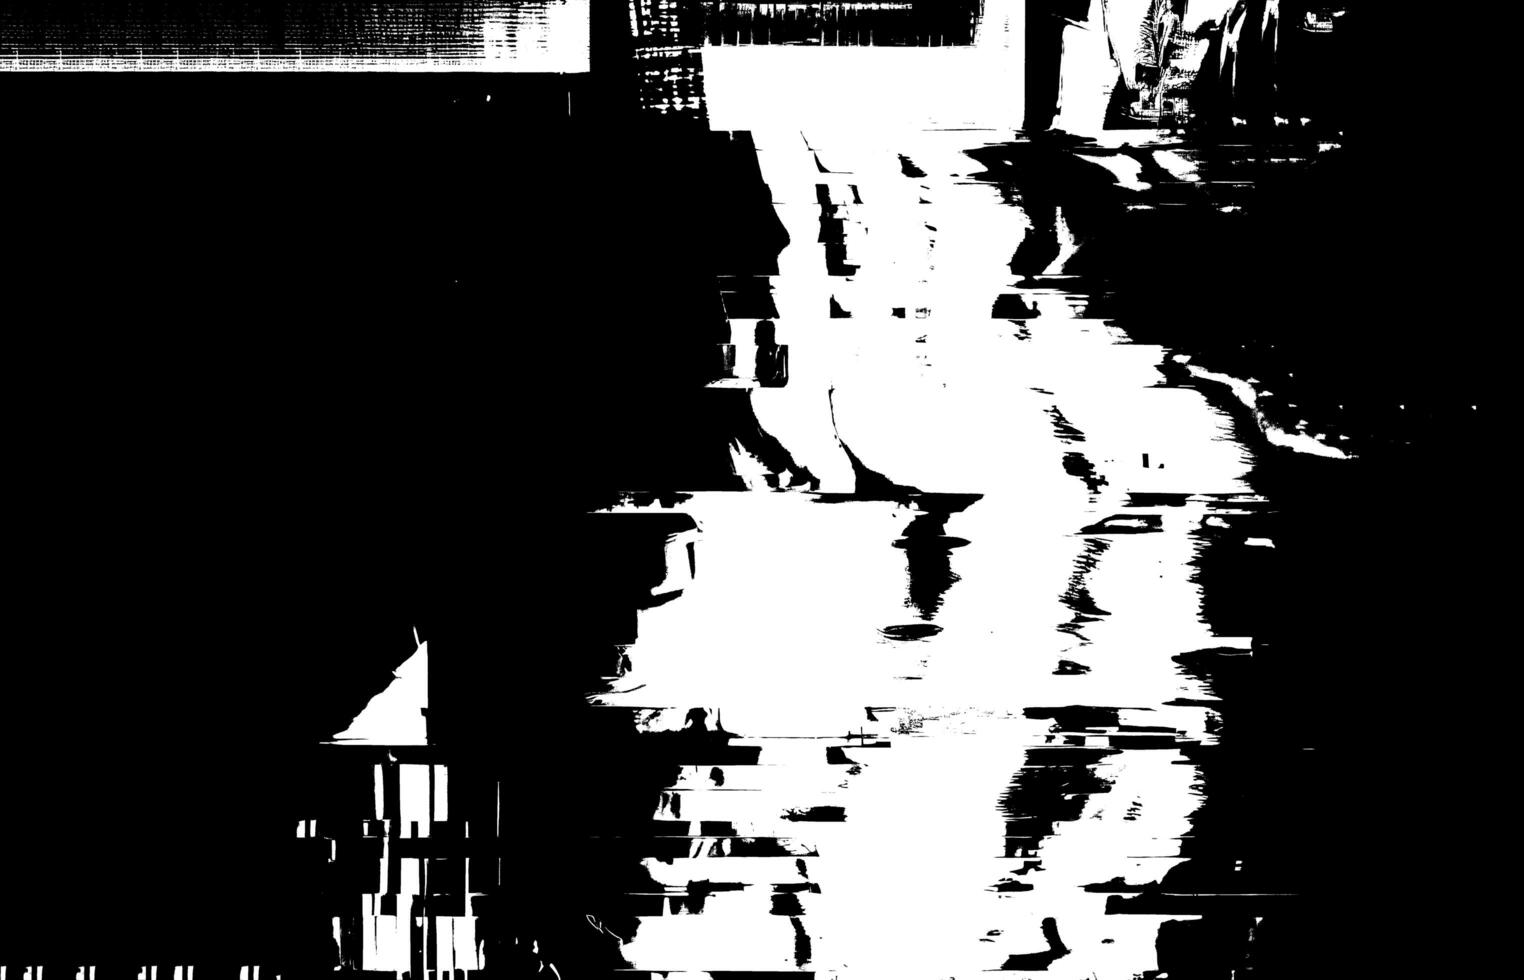 Broken Black and White Monochromatic Glitch Textures with a Distorted Grunge Aesthetic for Digital and Print Design photo